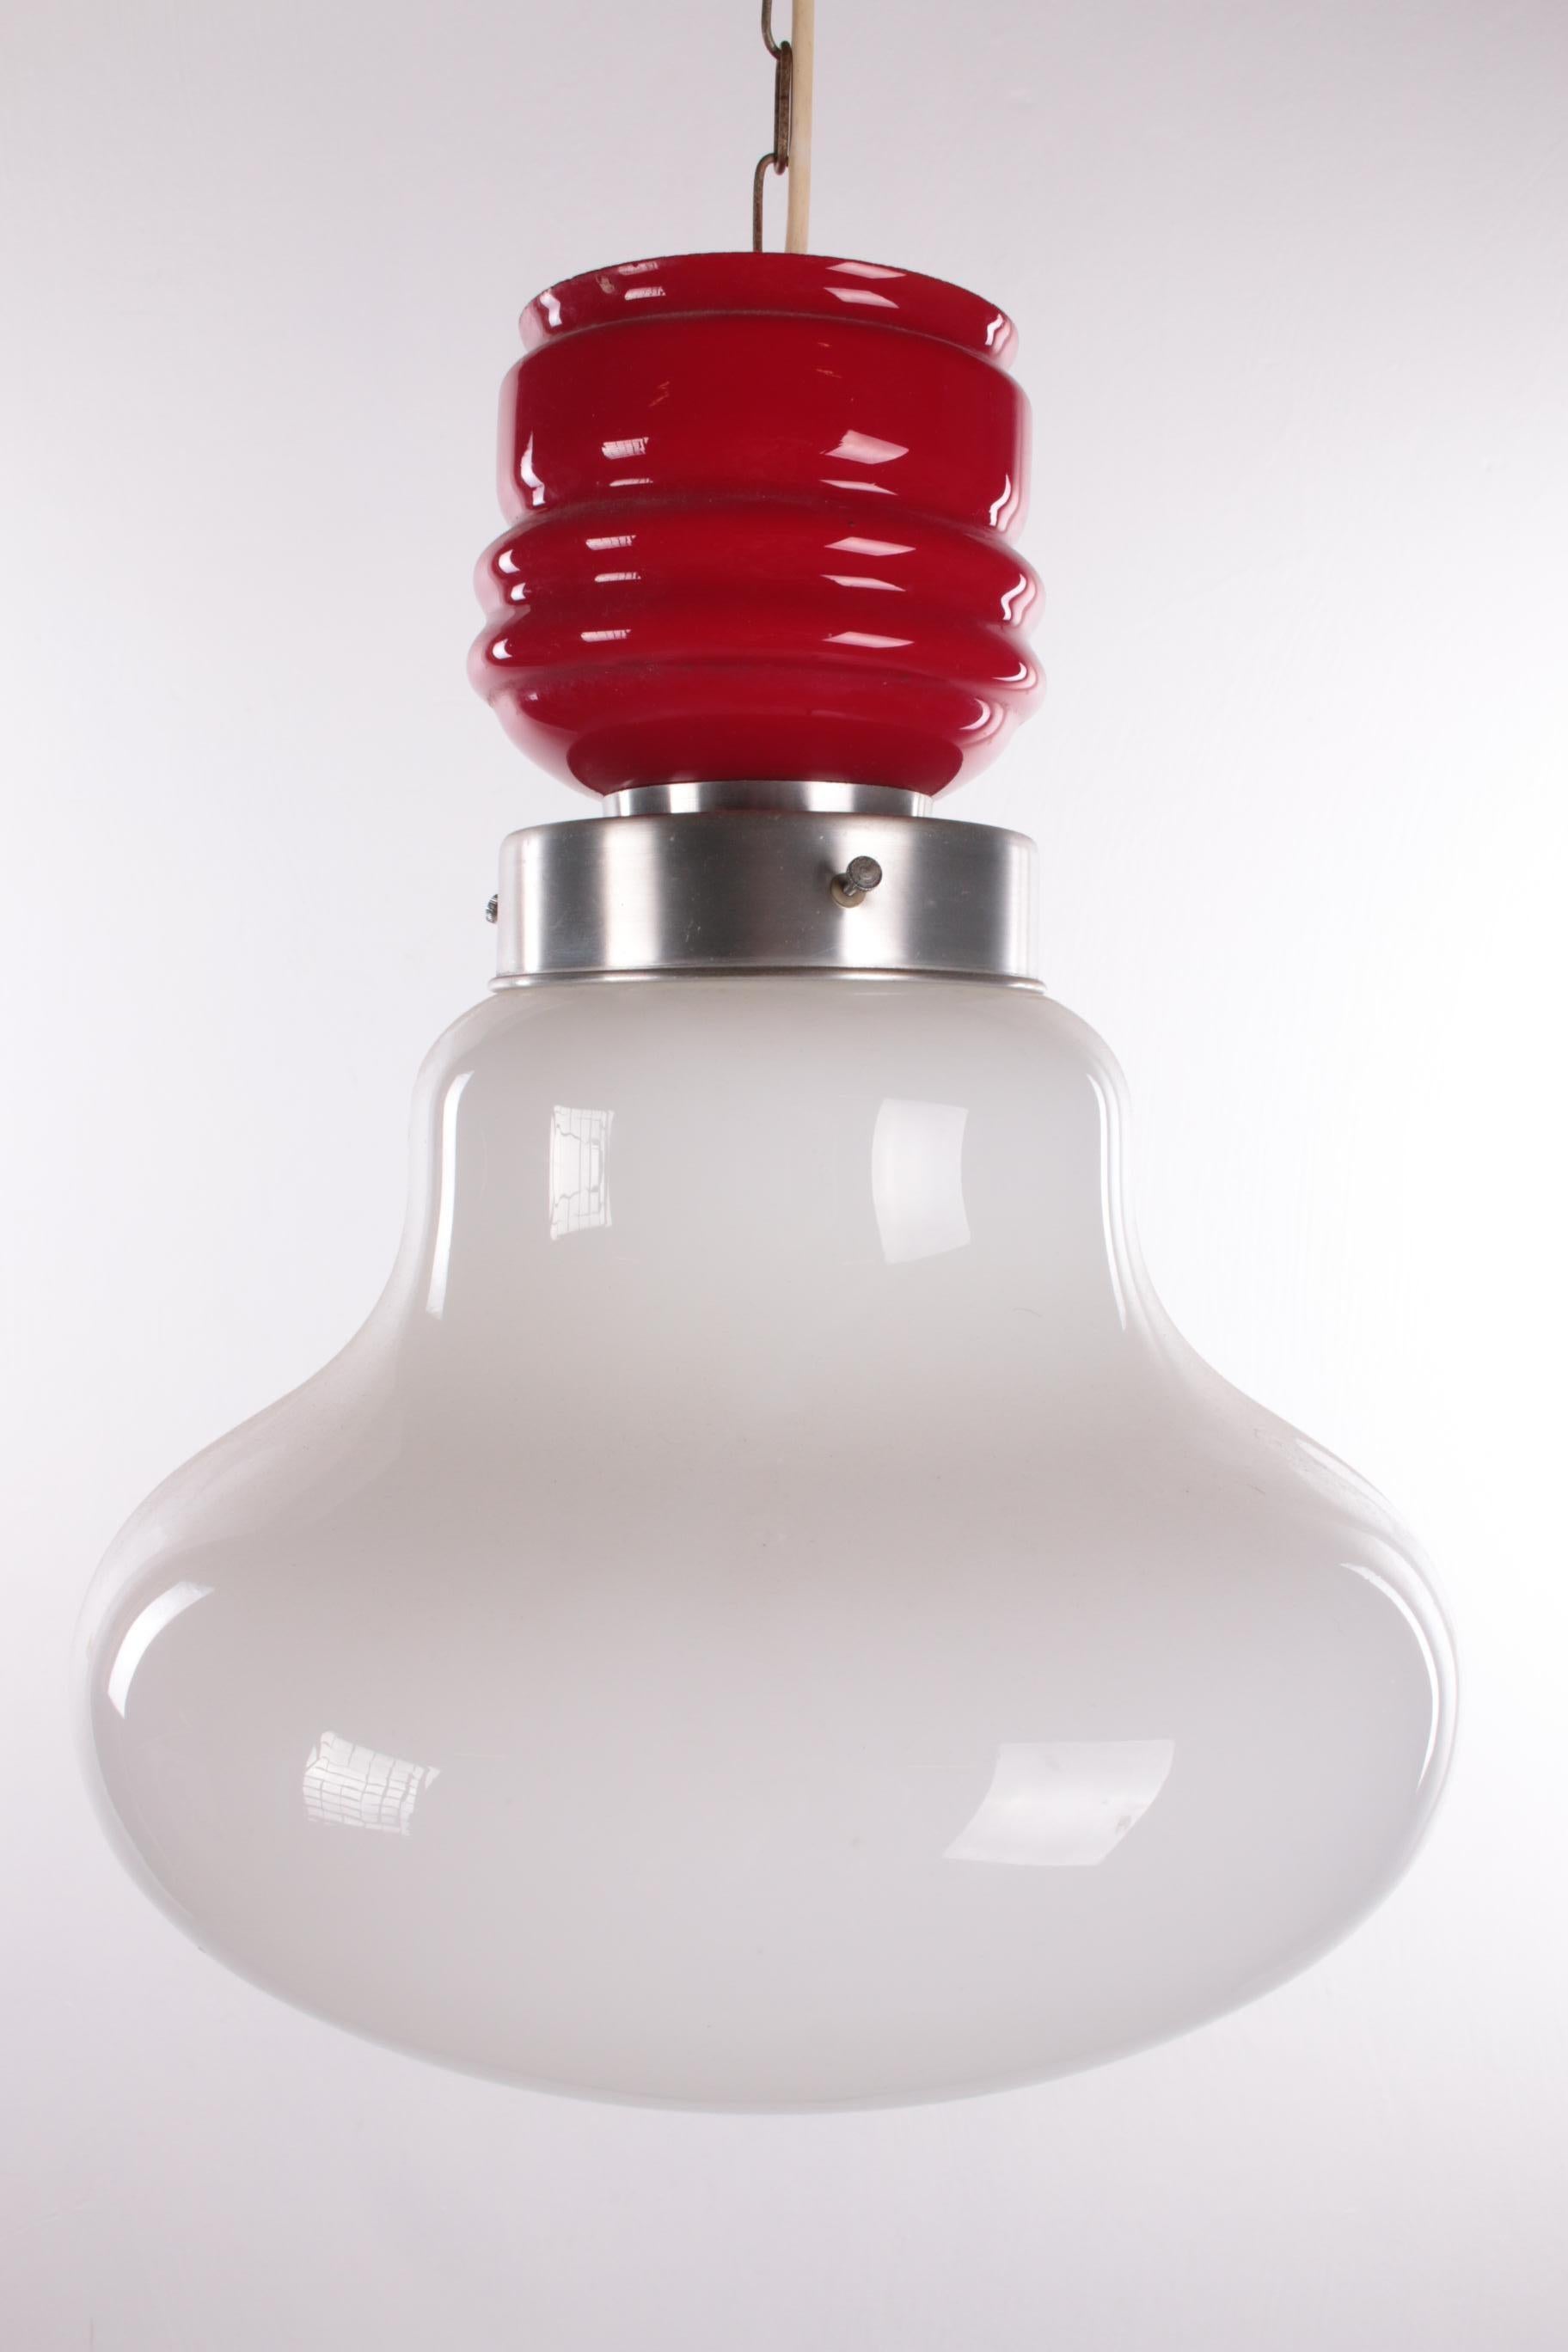 This is a particularly beautiful hanging lamp with red and white glass. 

The fun shape is somewhat reminiscent of a mushroom and the red detail makes this lamp a striking eye-catcher.

This lamp will fit beautifully with your